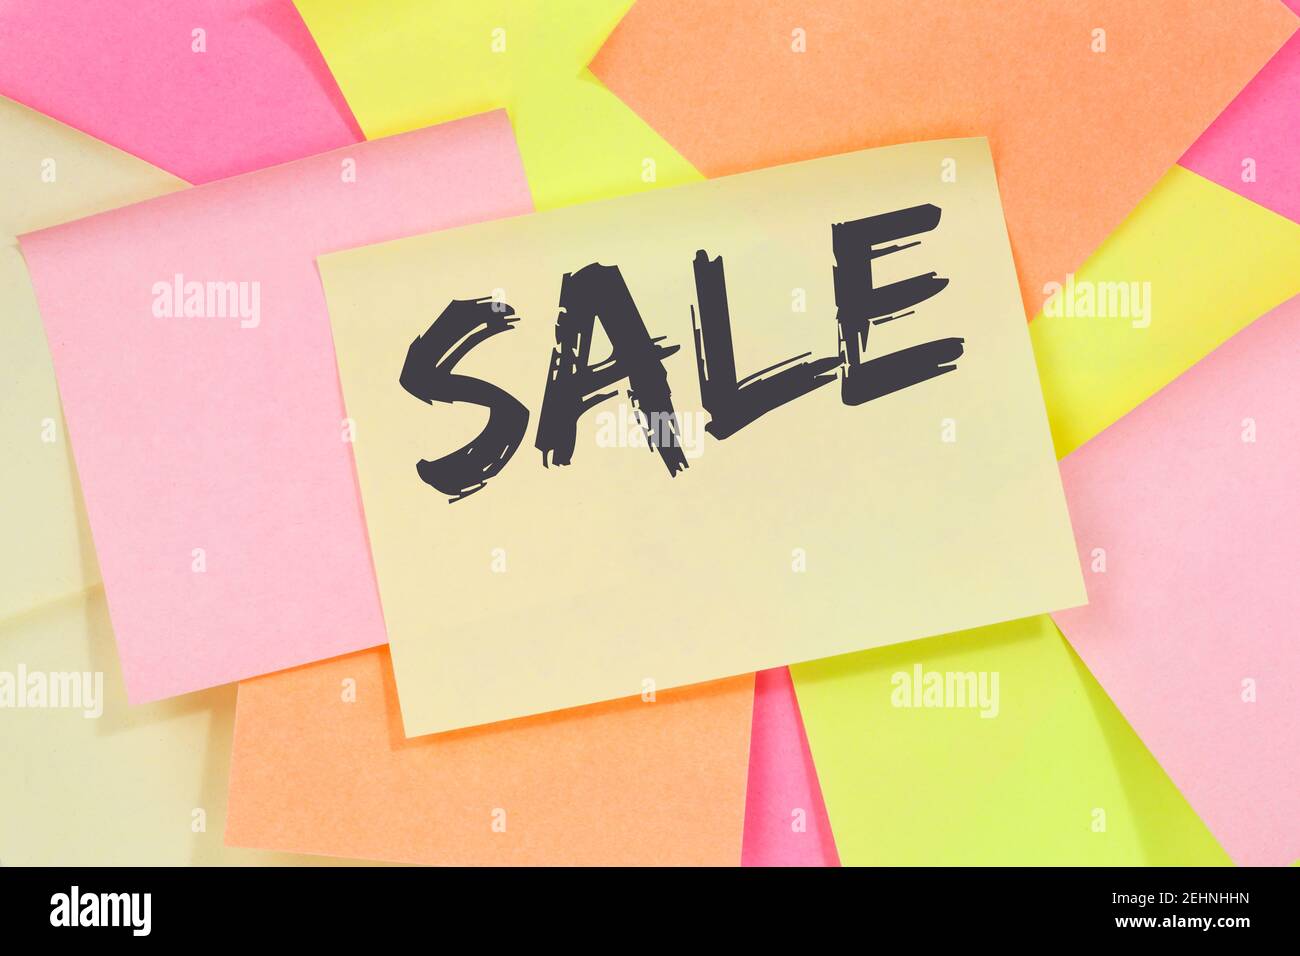 Sale shopping special offer business concept note paper notepaper Stock Photo